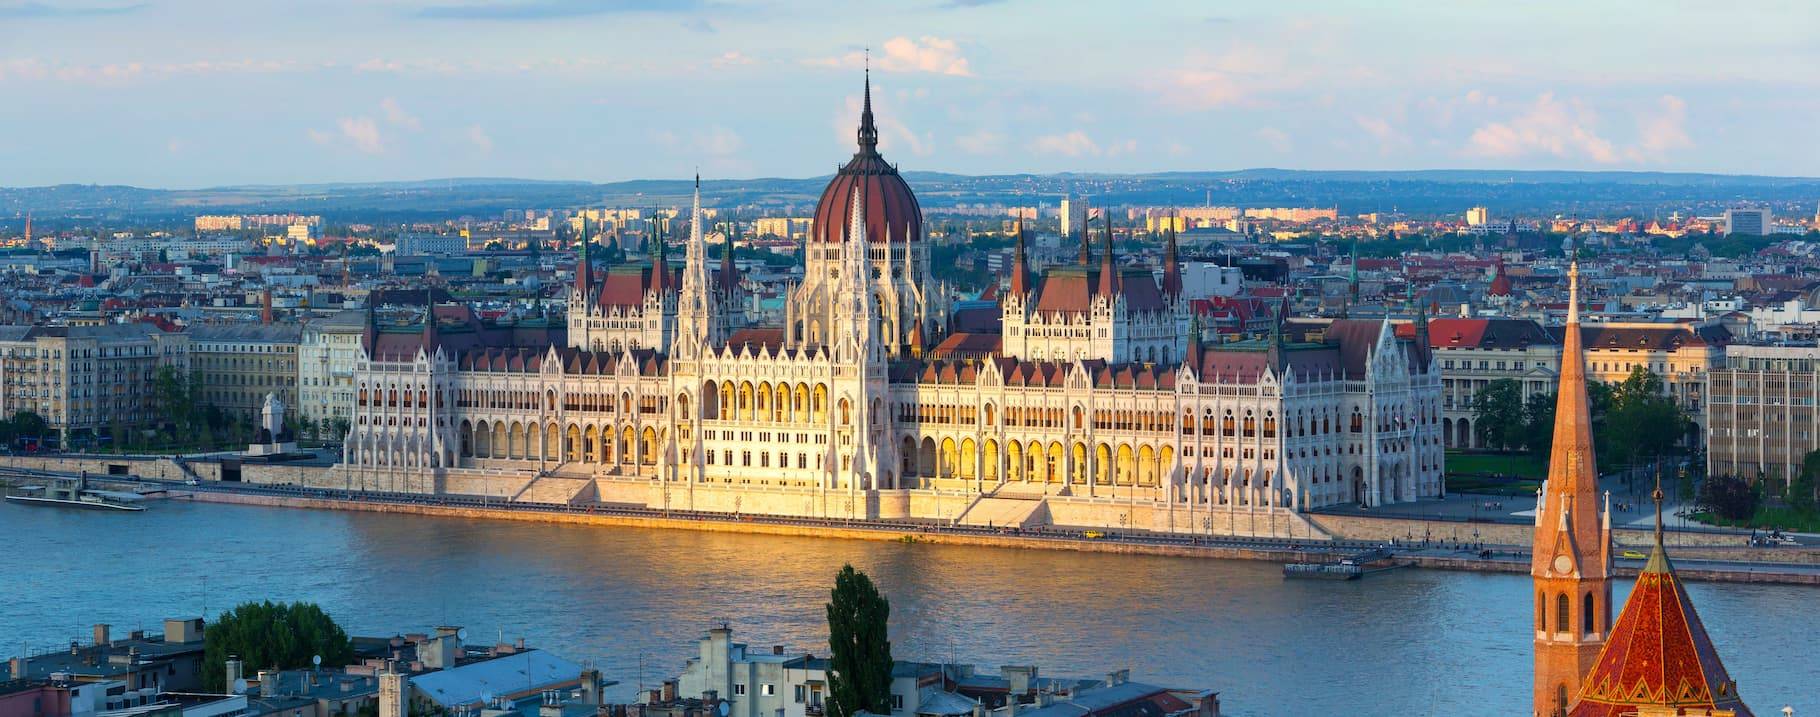 Budapest Free Walking Tour: An introduction to the city